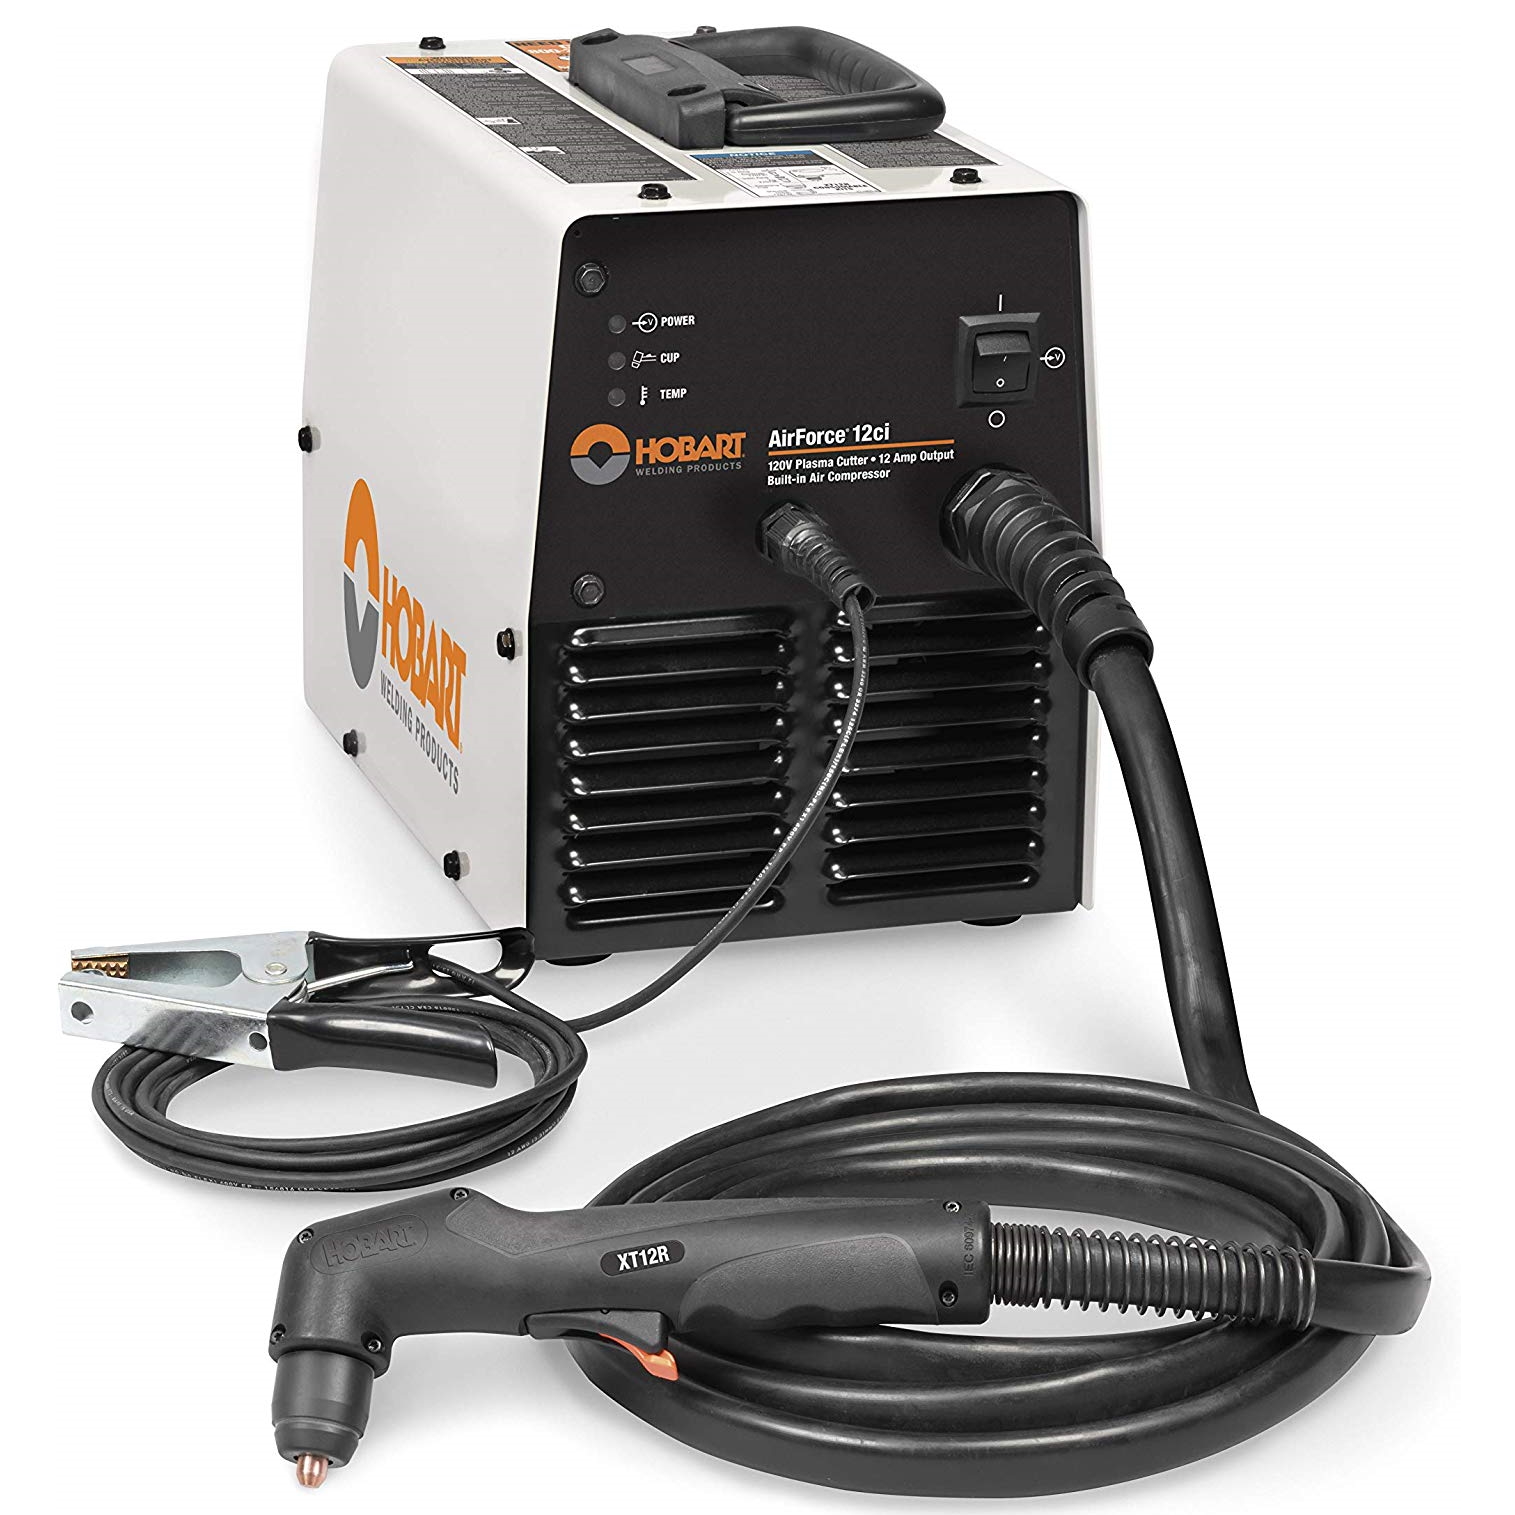 Hobart Airforce 12ci Plasma Cutter with Built-In Air Compressor